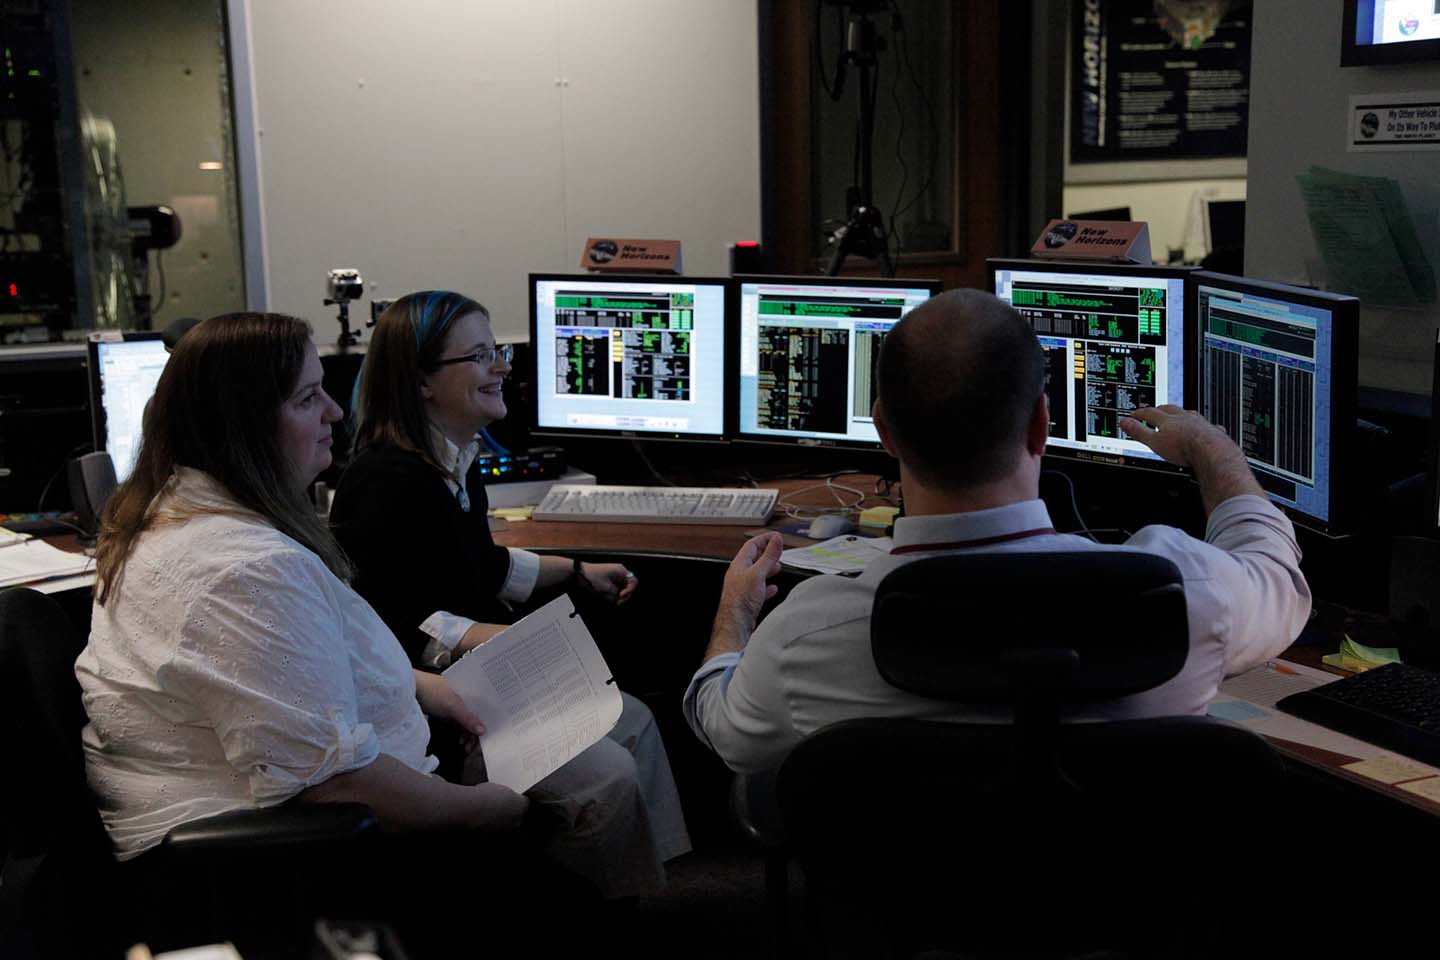 New Horizons flight controllers Sarah Bucior, Katie Bechtold and George Lawrence monitor data